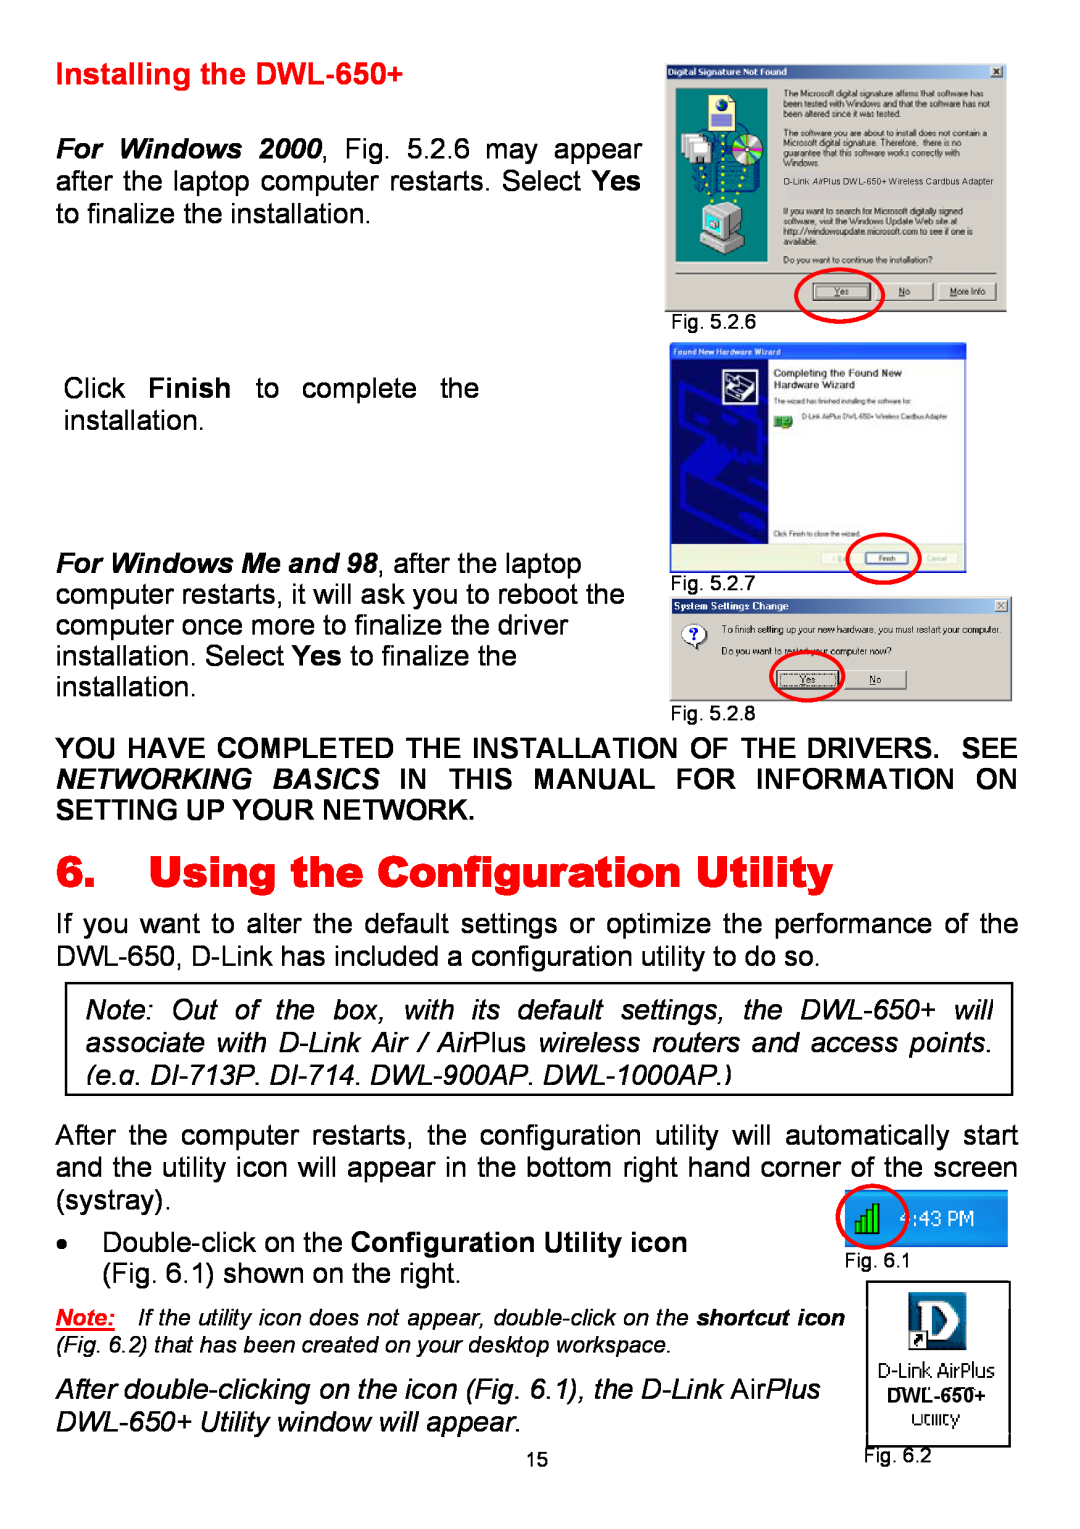 D-Link manual Using the Configuration Utility, Double-click on the Configuration Utility icon, Installing the DWL-650+ 